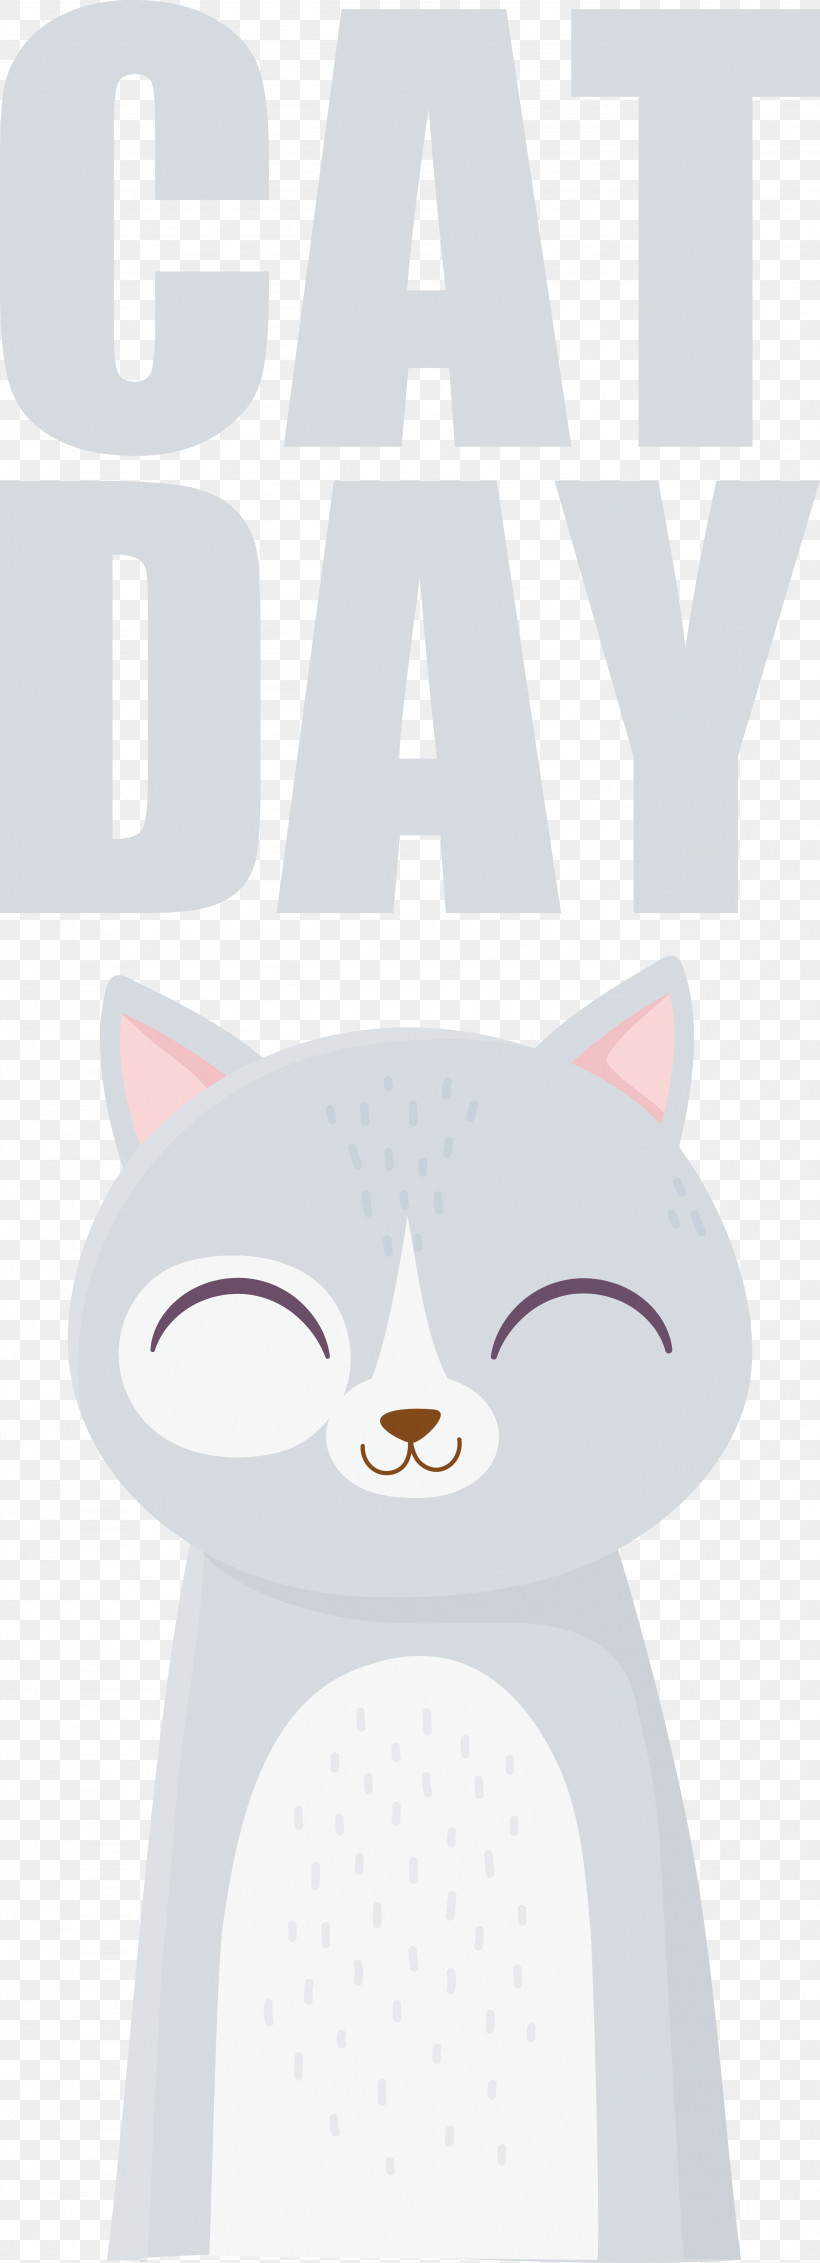 Cat Day National Cat Day, PNG, 2768x7641px, Cat Day, National Cat Day Download Free